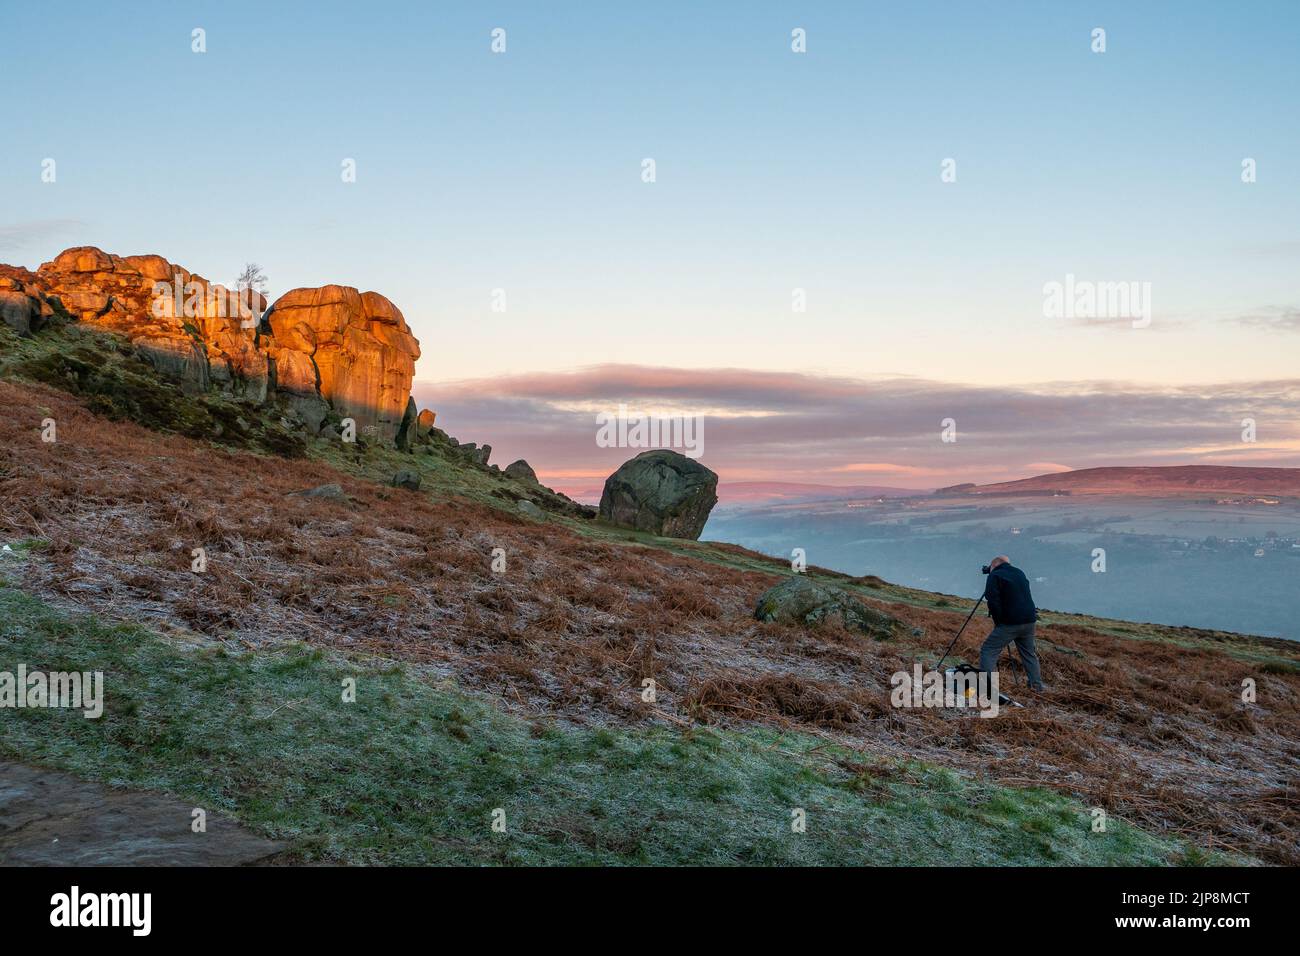 Photographer with tripod photographing sunrise at the Cow and Calf Rocks, Ilkley Moor, England. Stock Photo